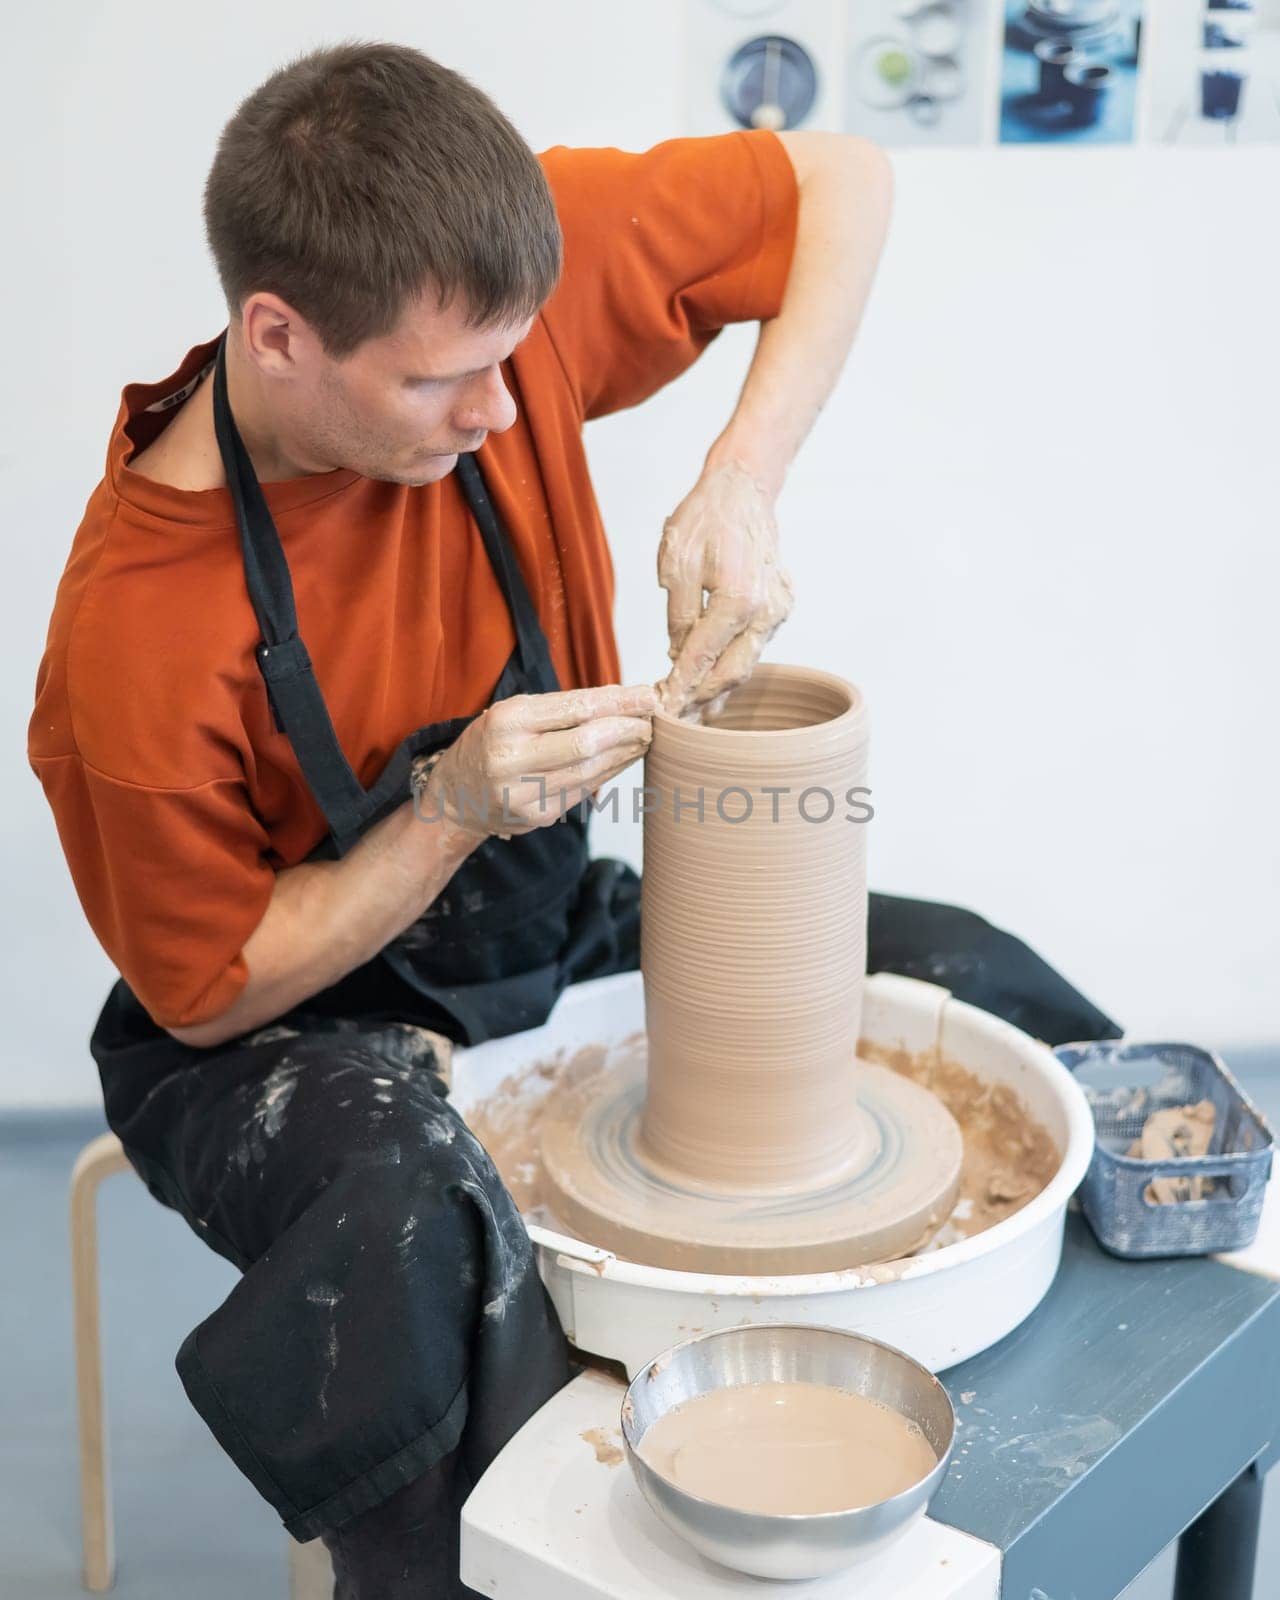 A potter works on a potter's wheel to smooth the surface of a vase. by mrwed54